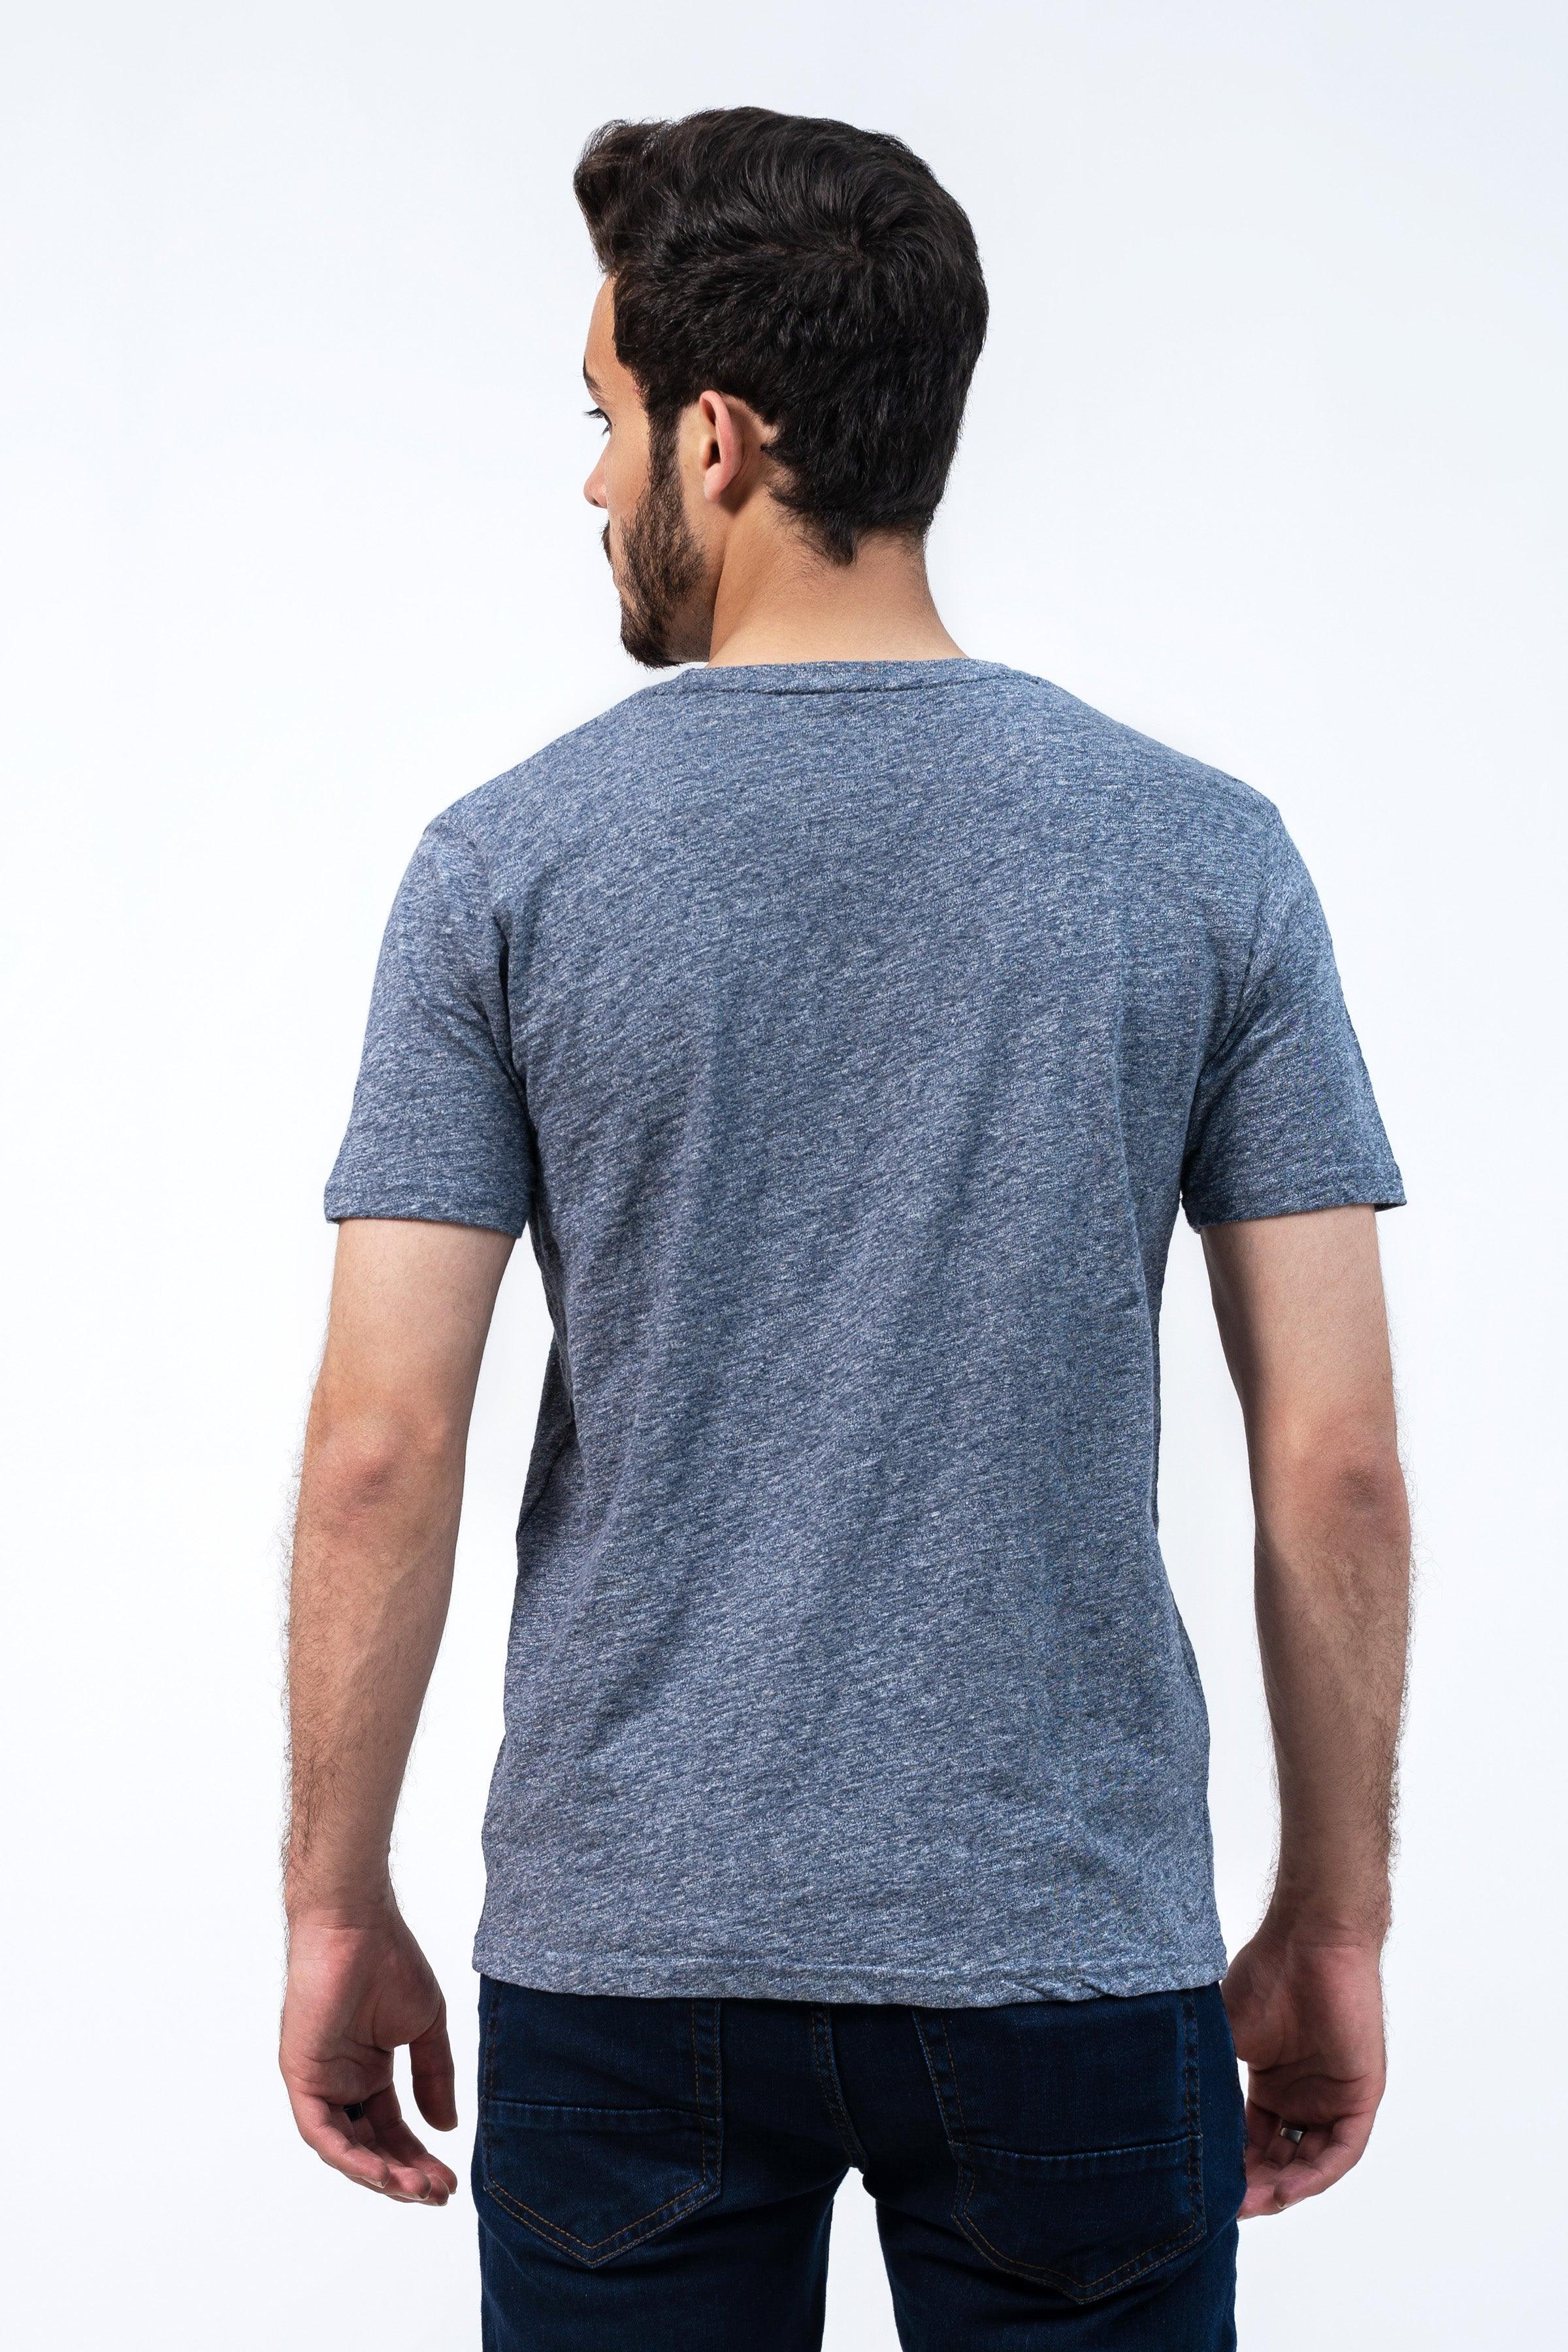 CLASSIC T SHIRT NAVY at Charcoal Clothing